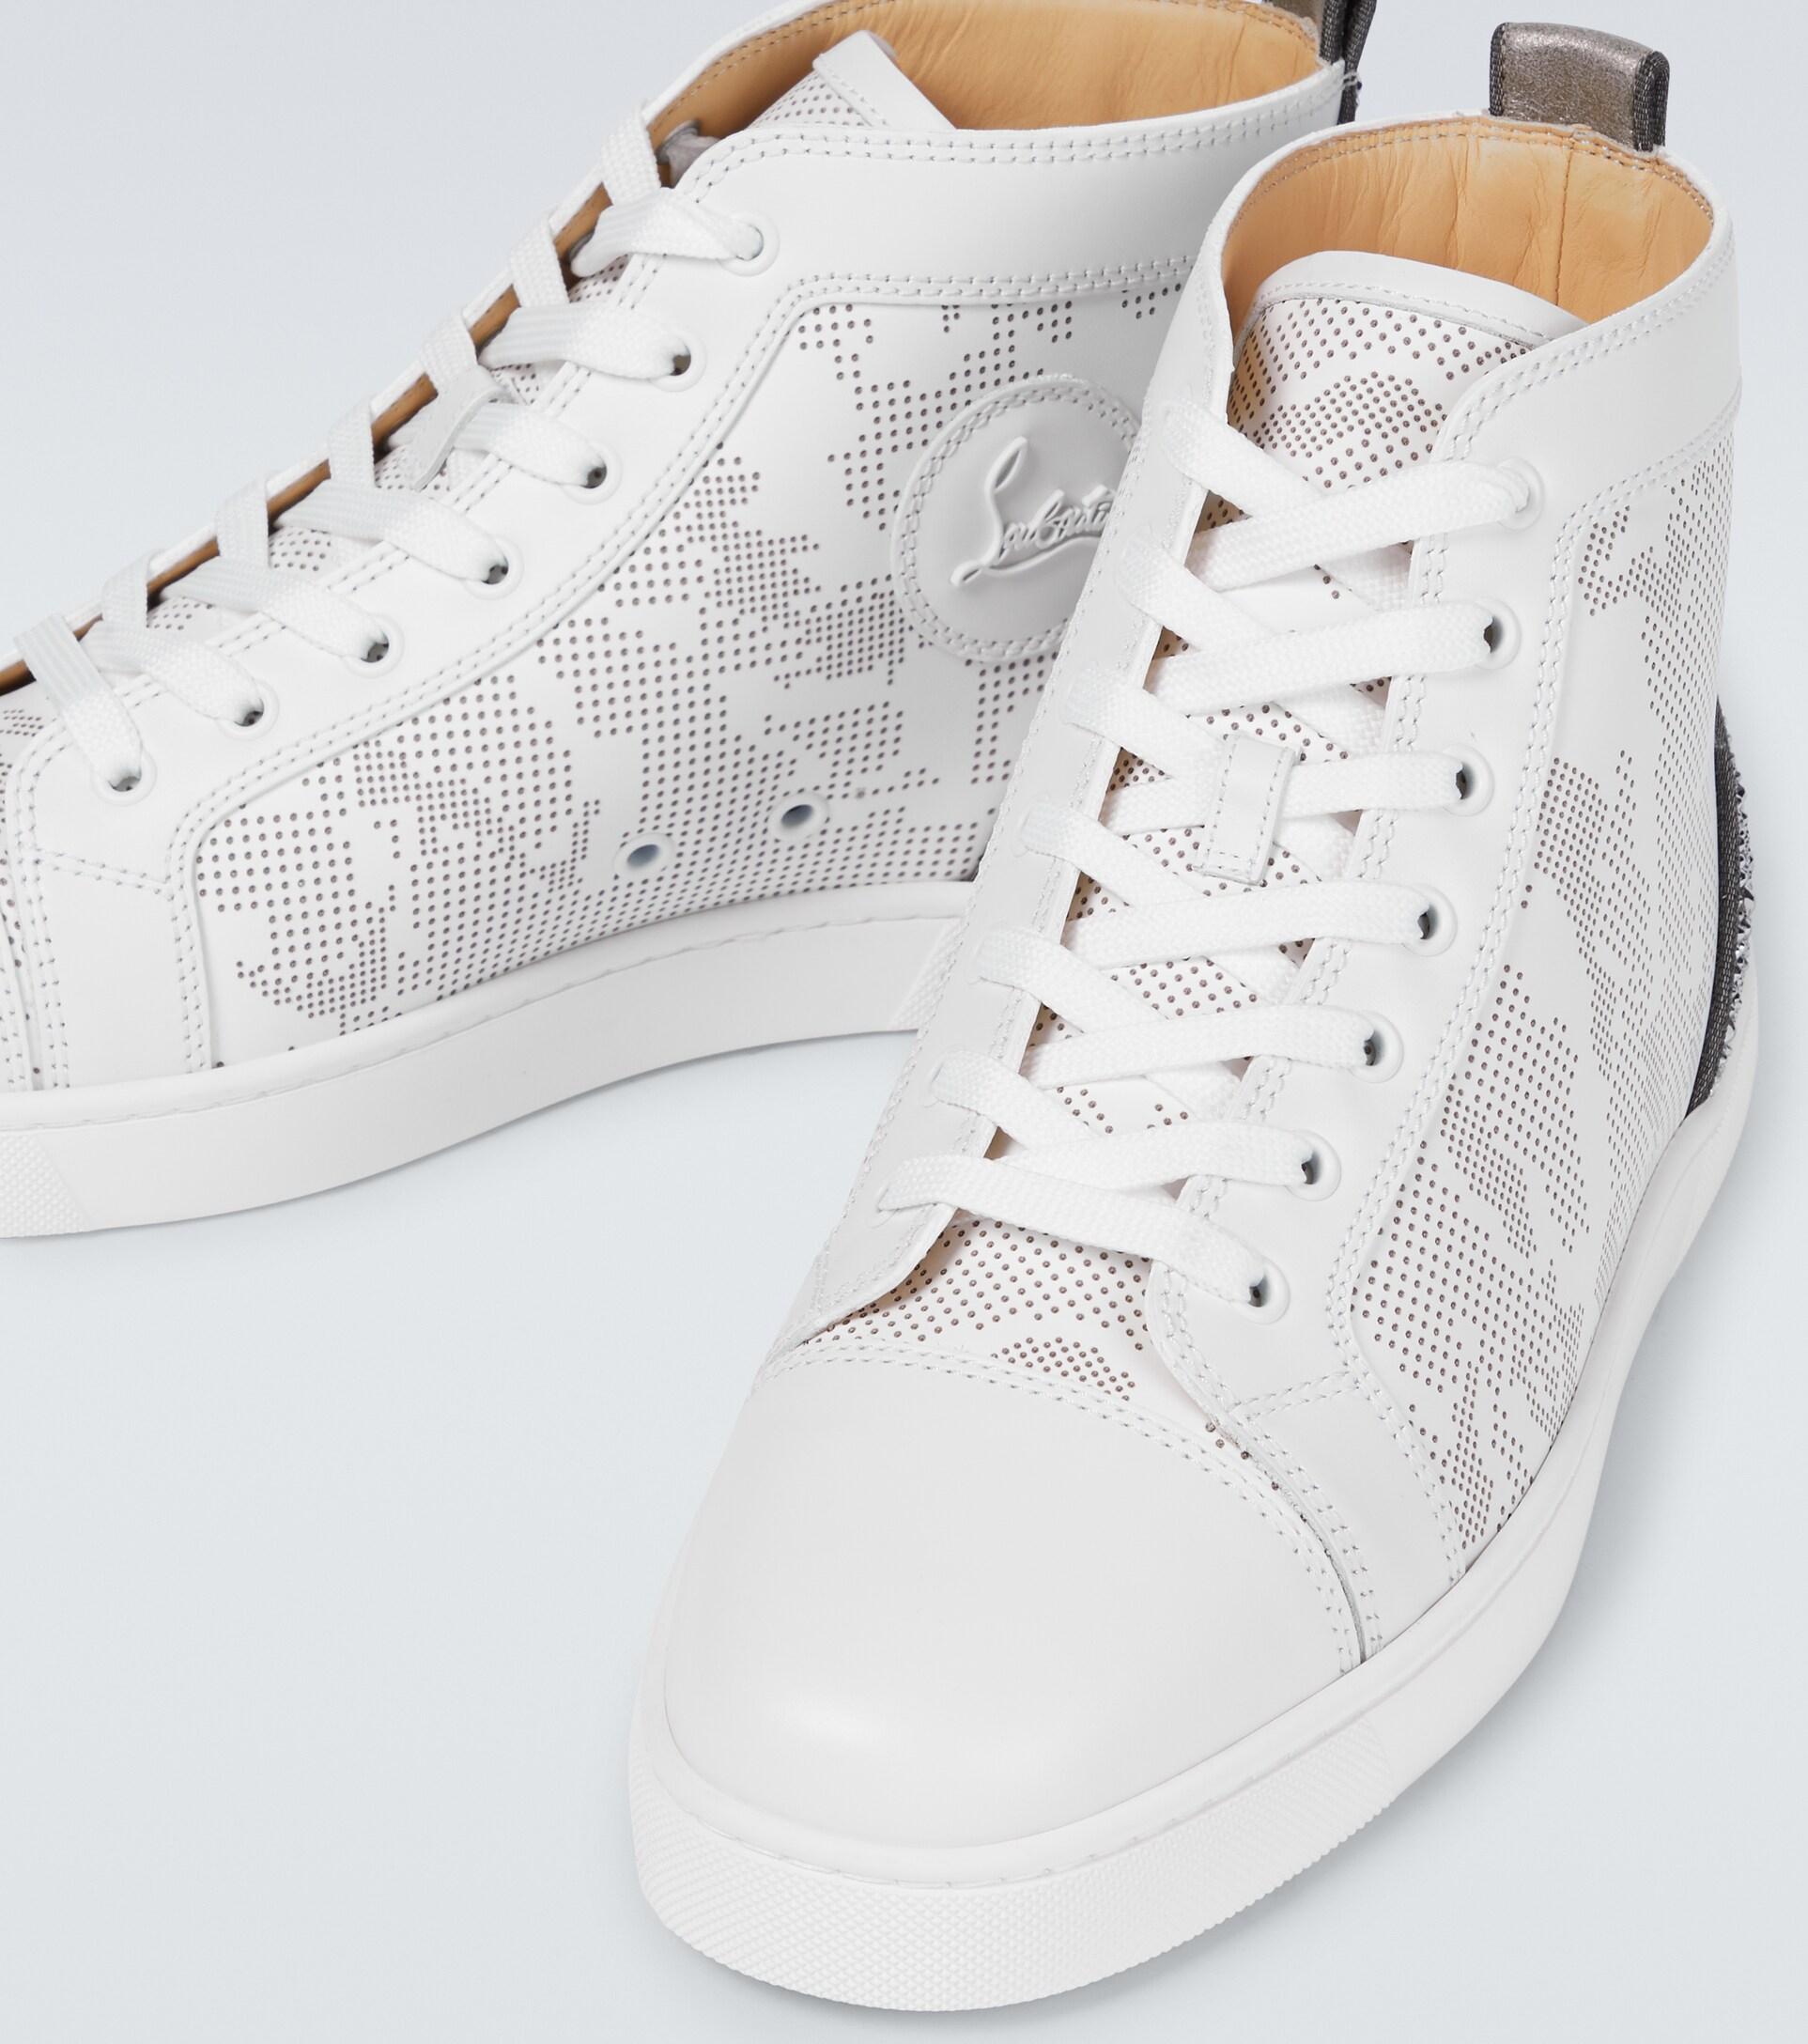 Christian Louboutin Leather Louis Sp Strass High-top Sneakers in 